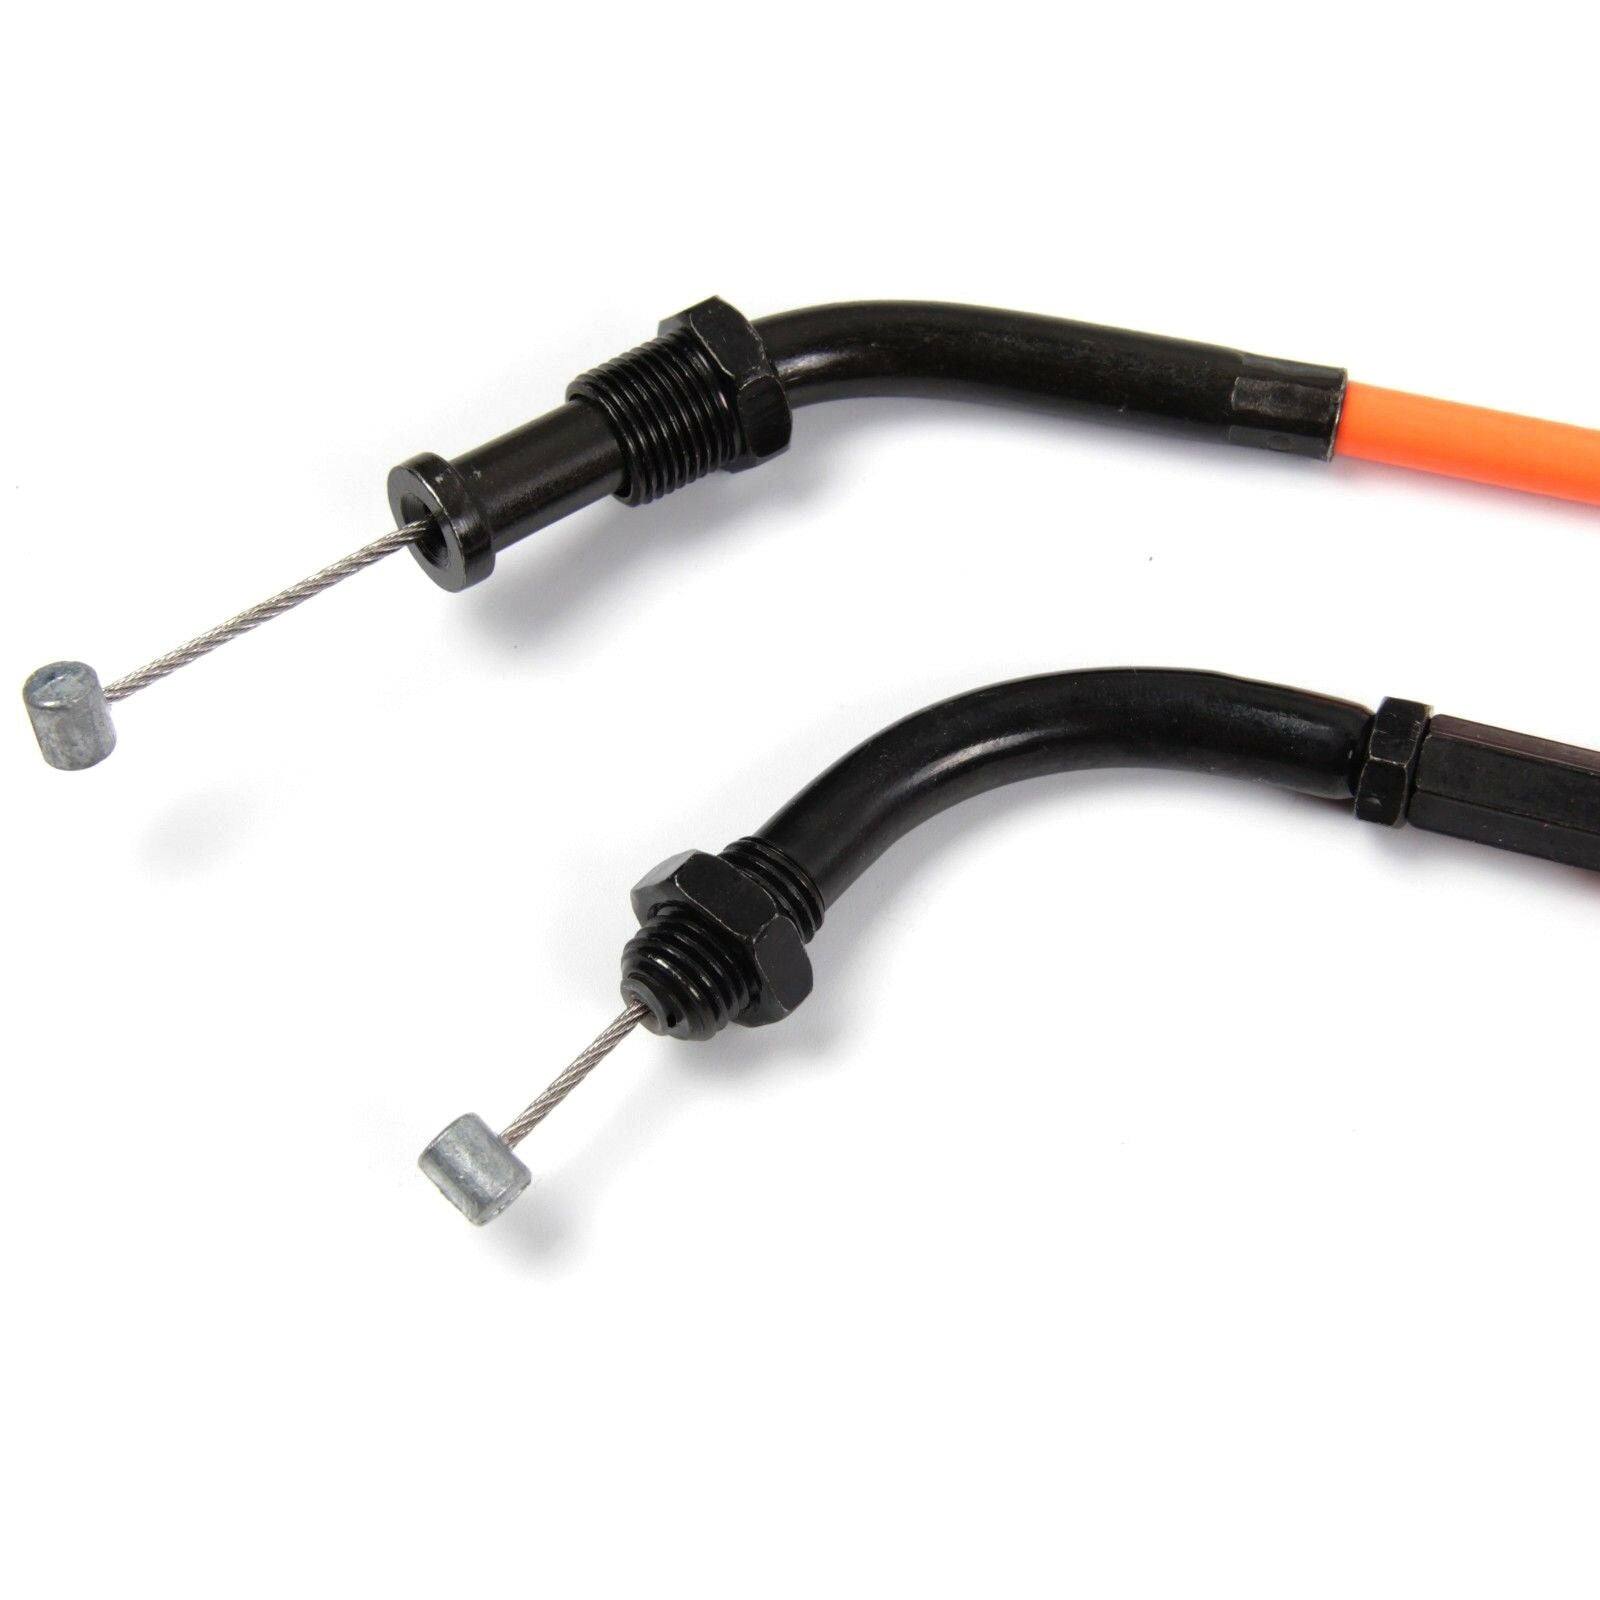 Pair of New! THROTTLE CABLE Line for Yamaha YZF R1 2007 2008 Black/Yellow/Orange - TDRMOTO